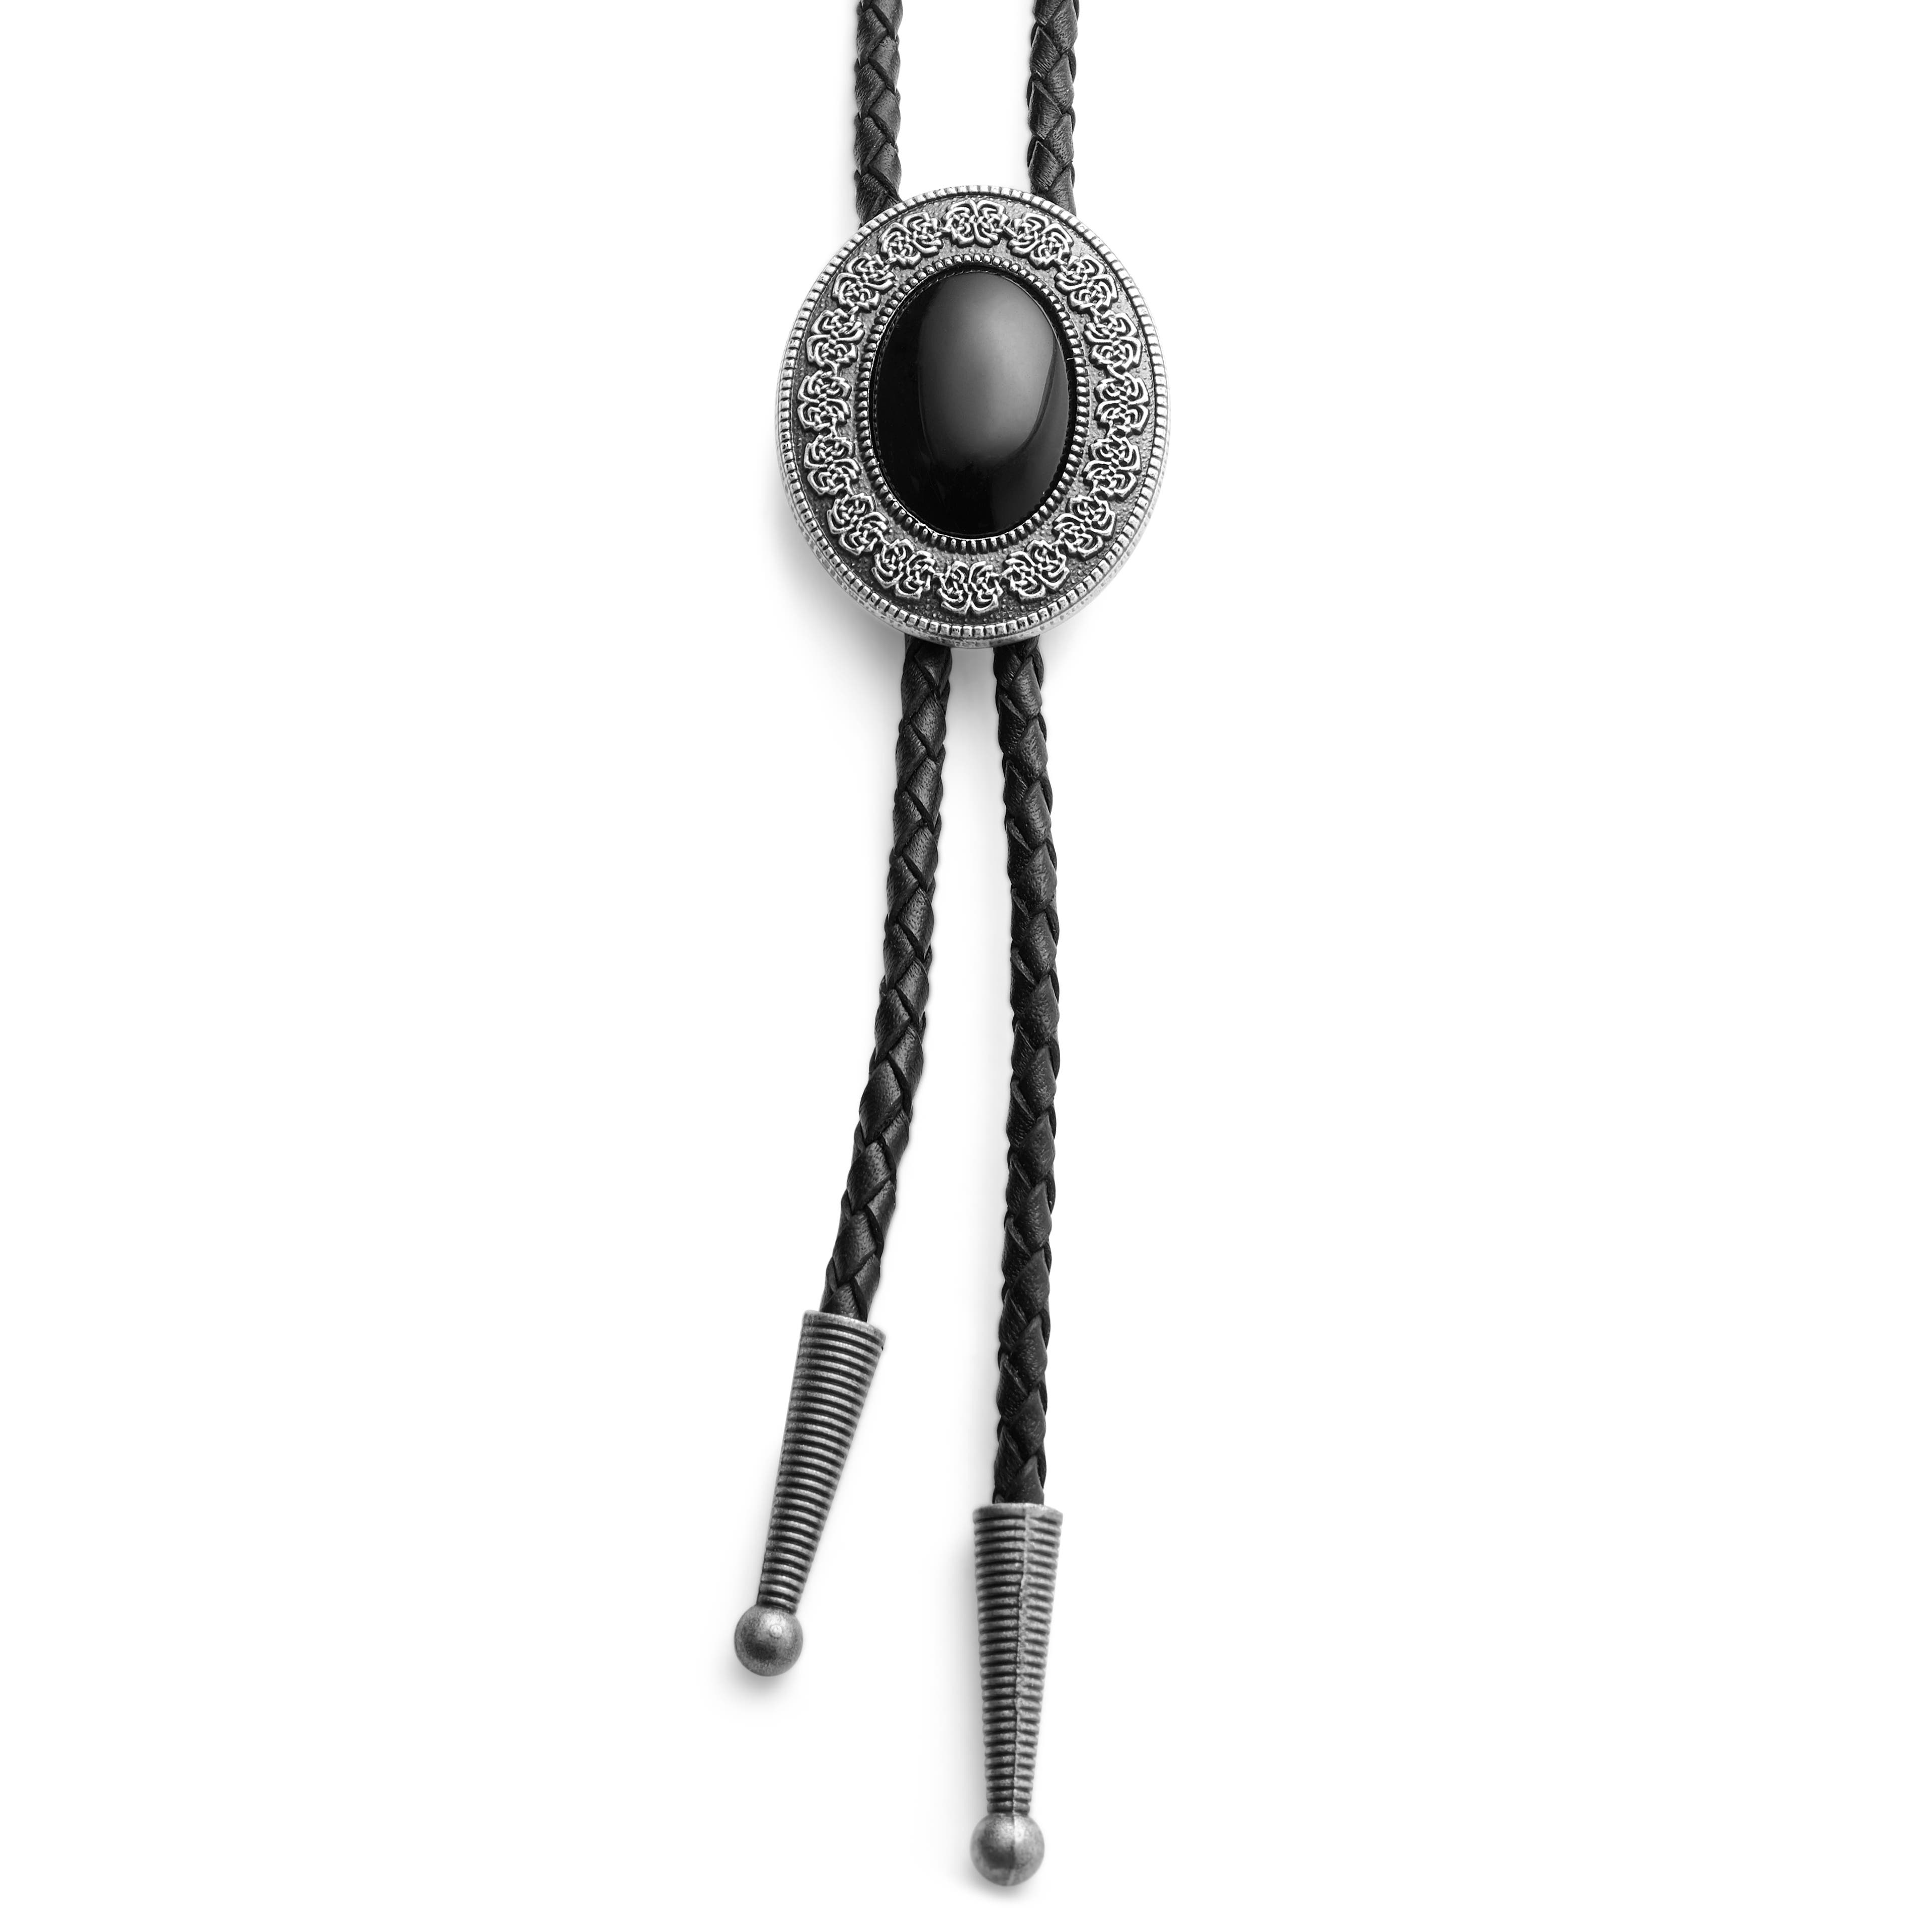 Obsidian Stone Adjustable Braided Leather Bolo Tie